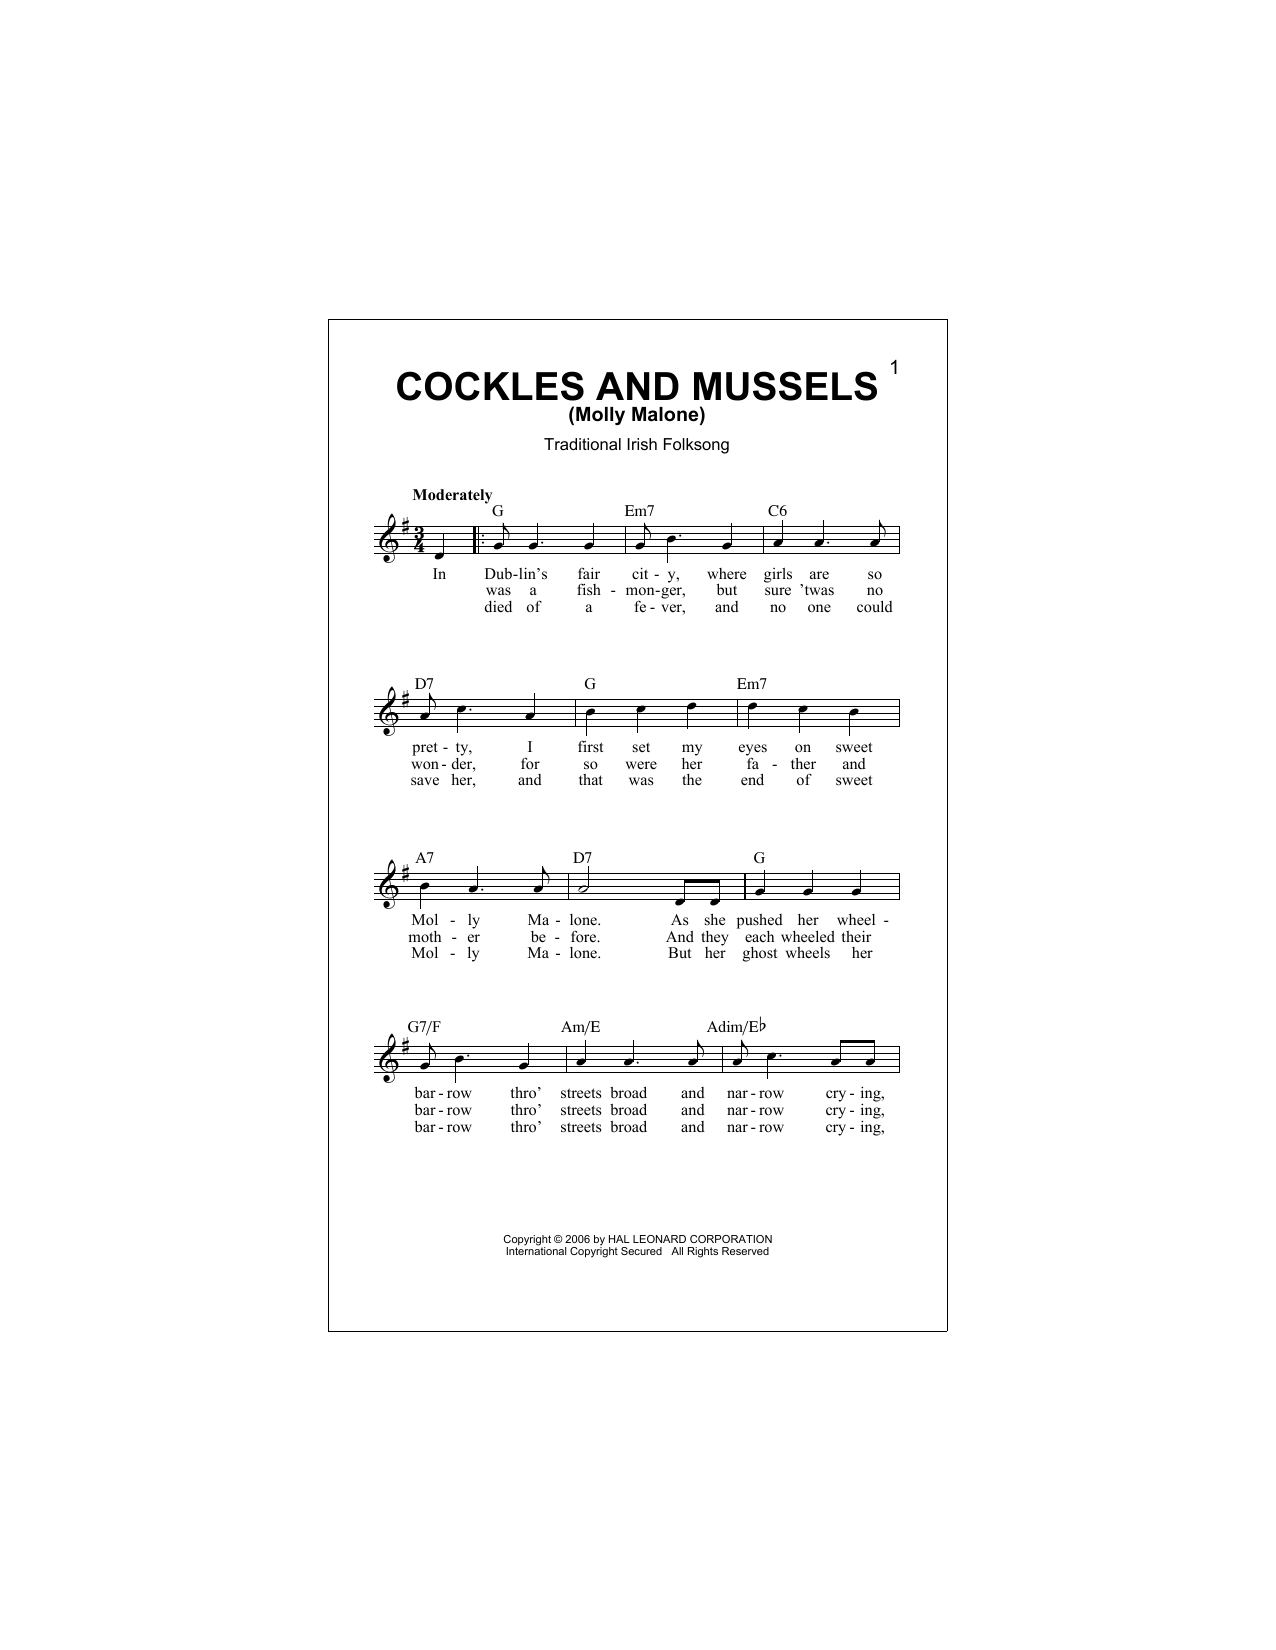 Download Traditional Irish Folksong Cockles And Mussels (Molly Malone) Sheet Music